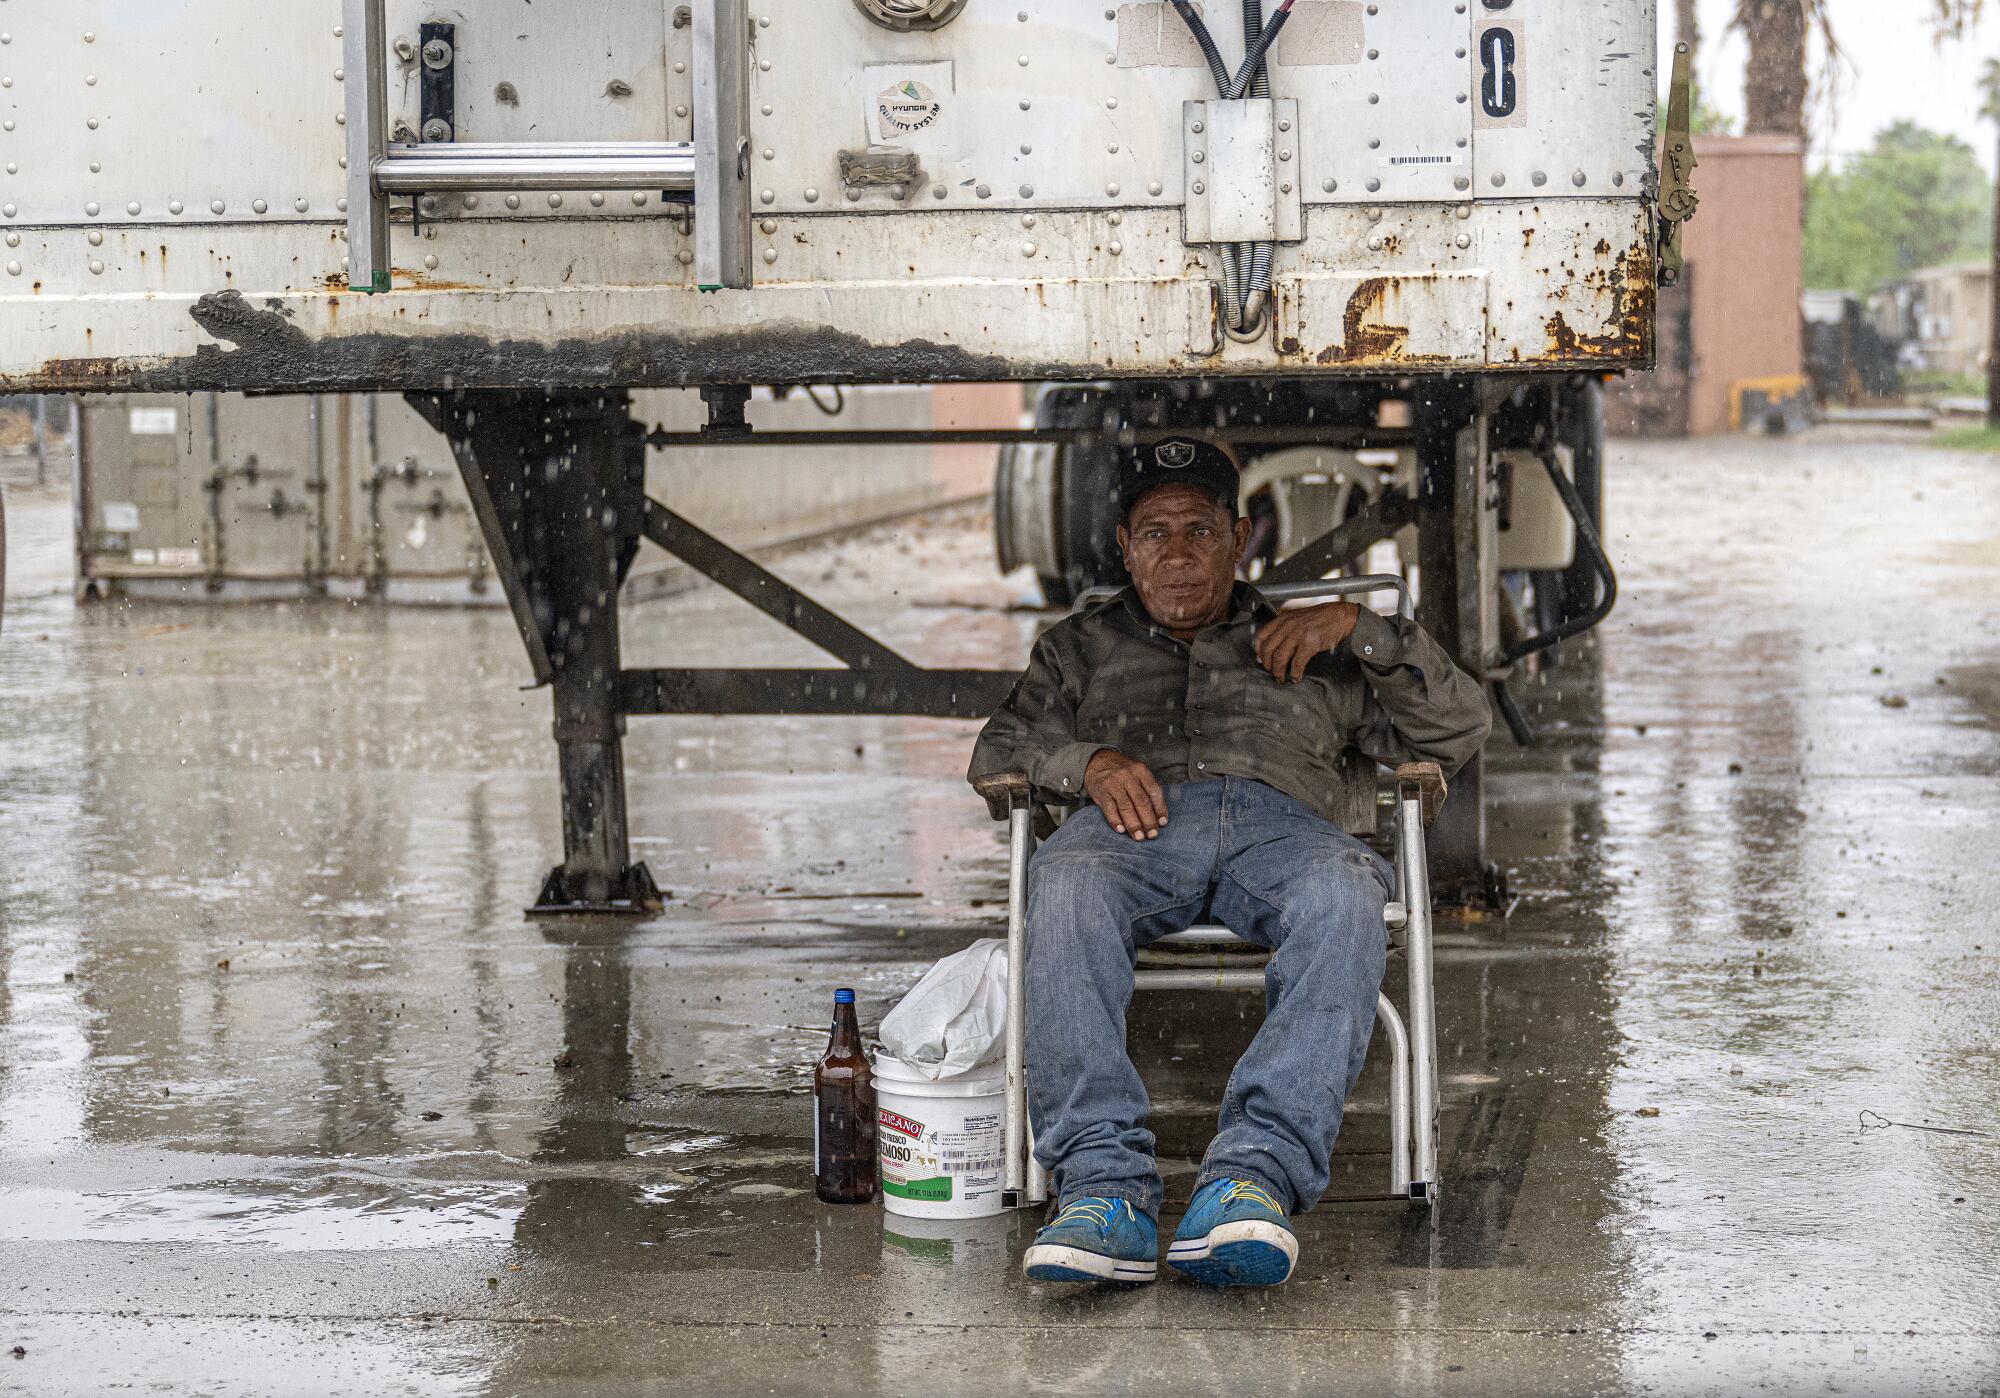 A man sits in a chair under a white big rig while it rains